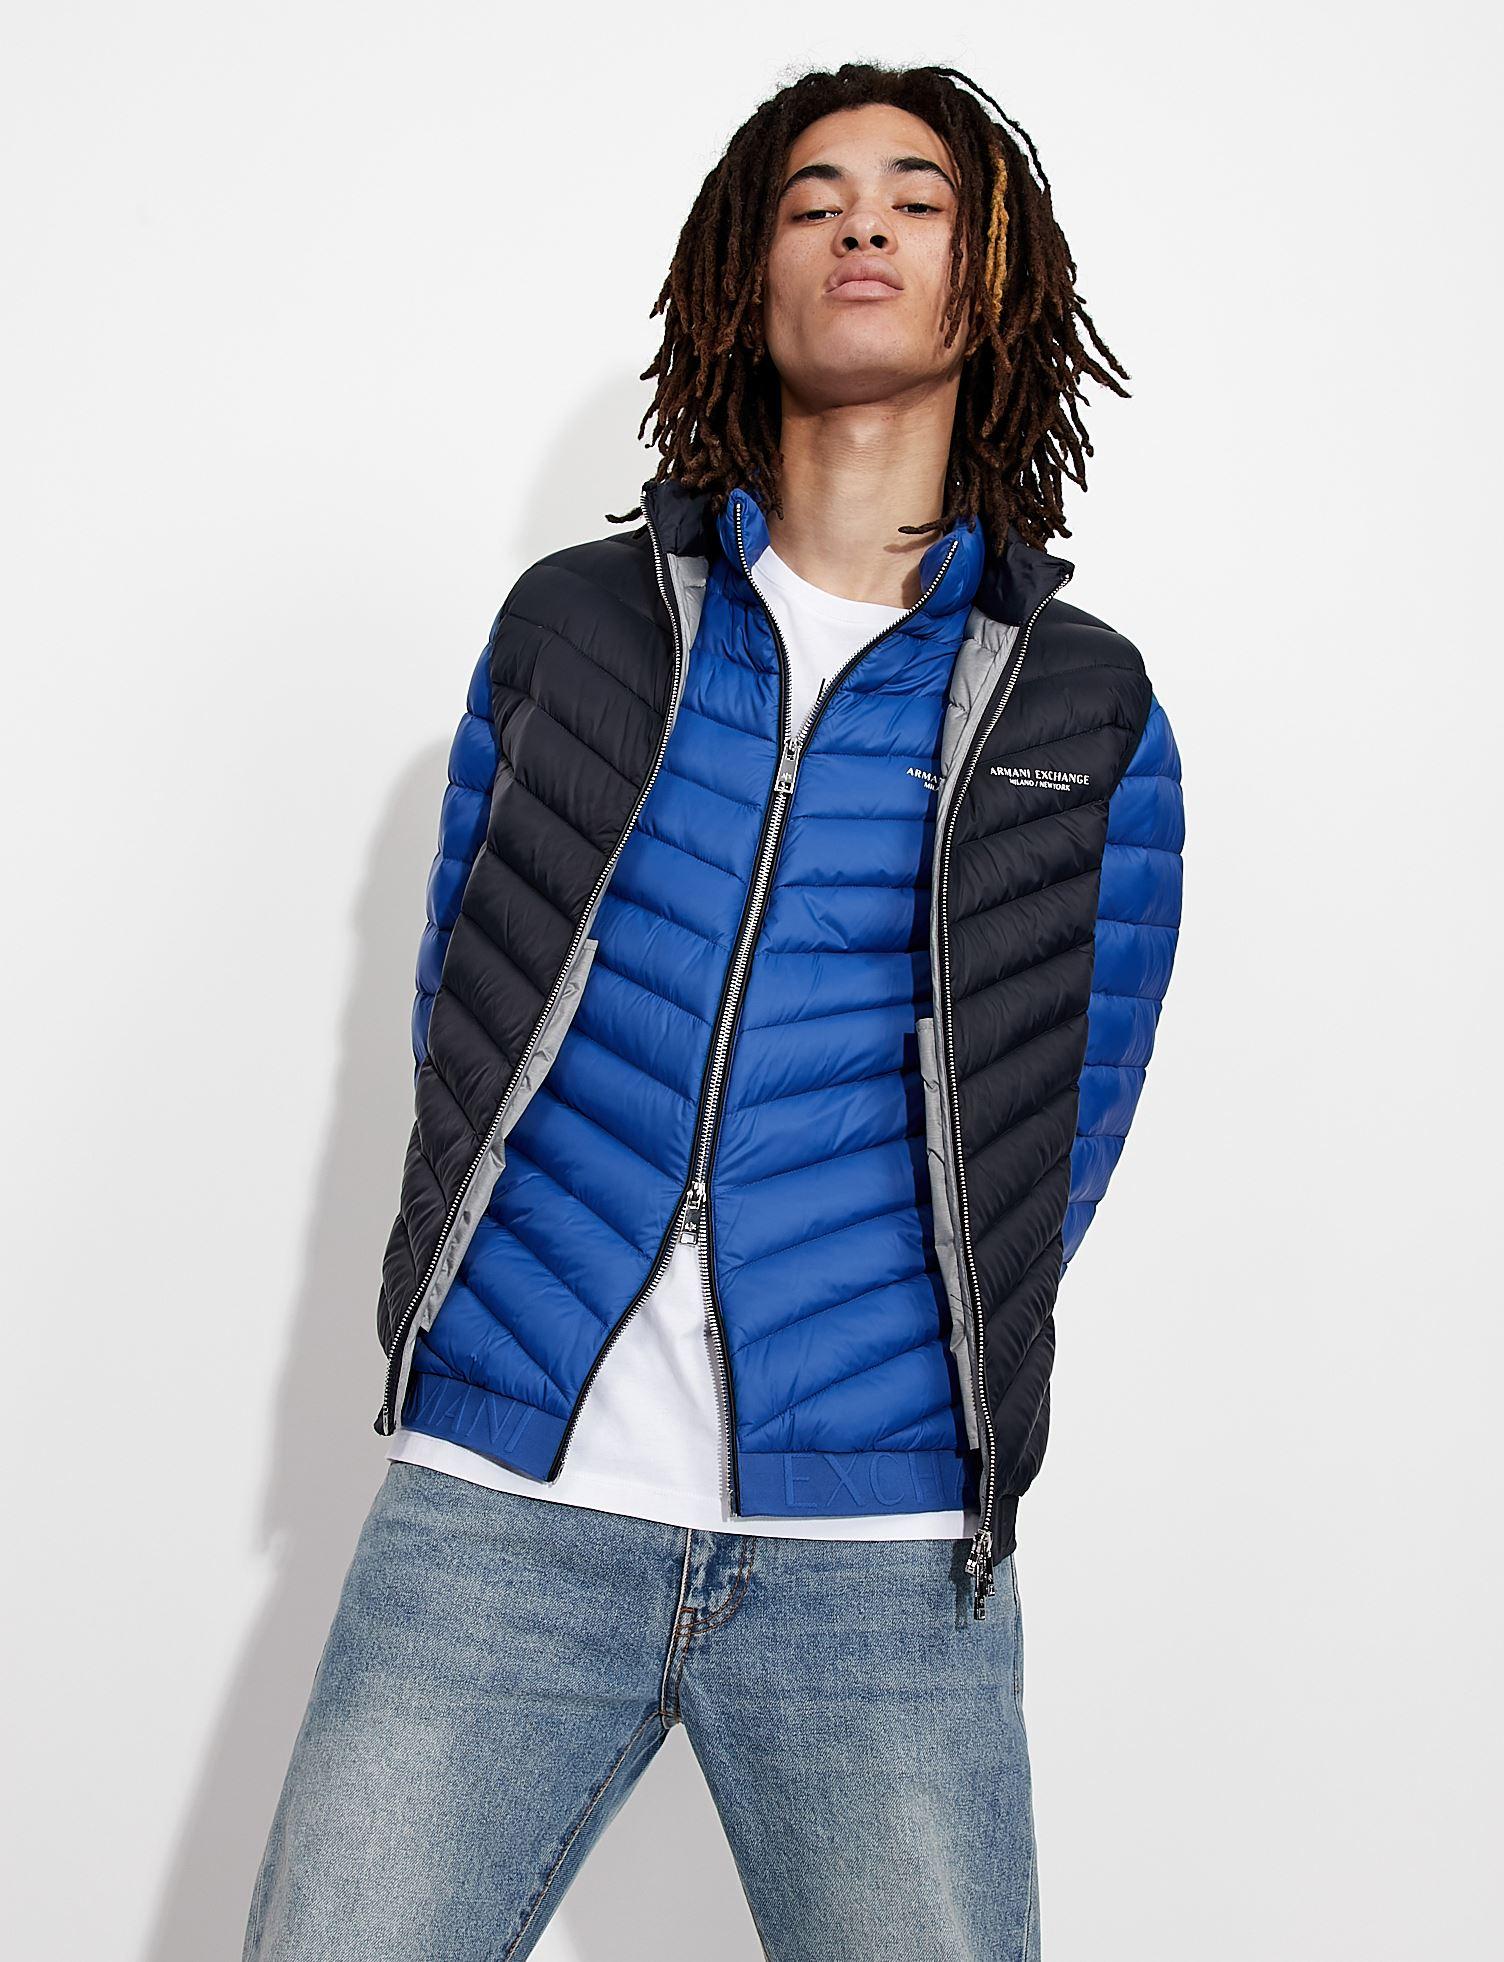 Armani Exchange Milano New York Puffer Jacket in Blue for Men Lyst